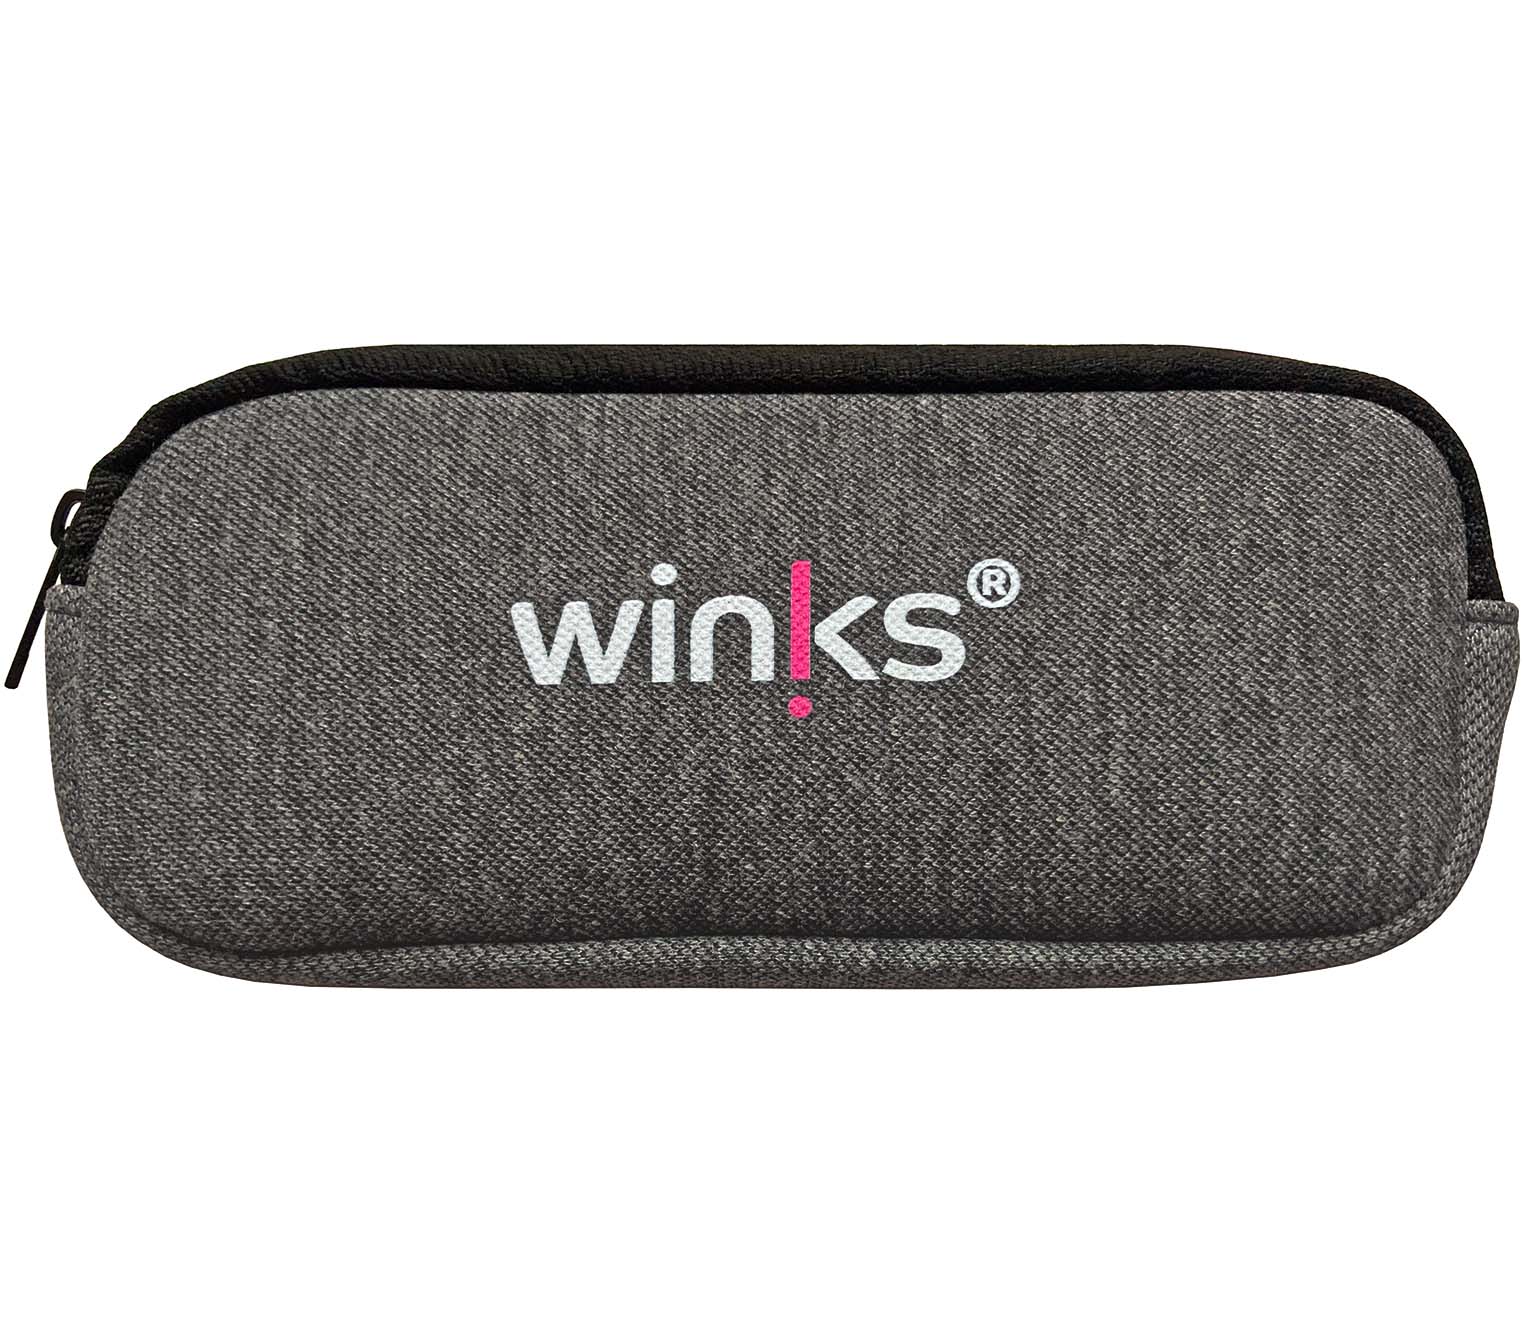 Main Image (Angle) - Kit (Winks) Glasses Cases Accessories